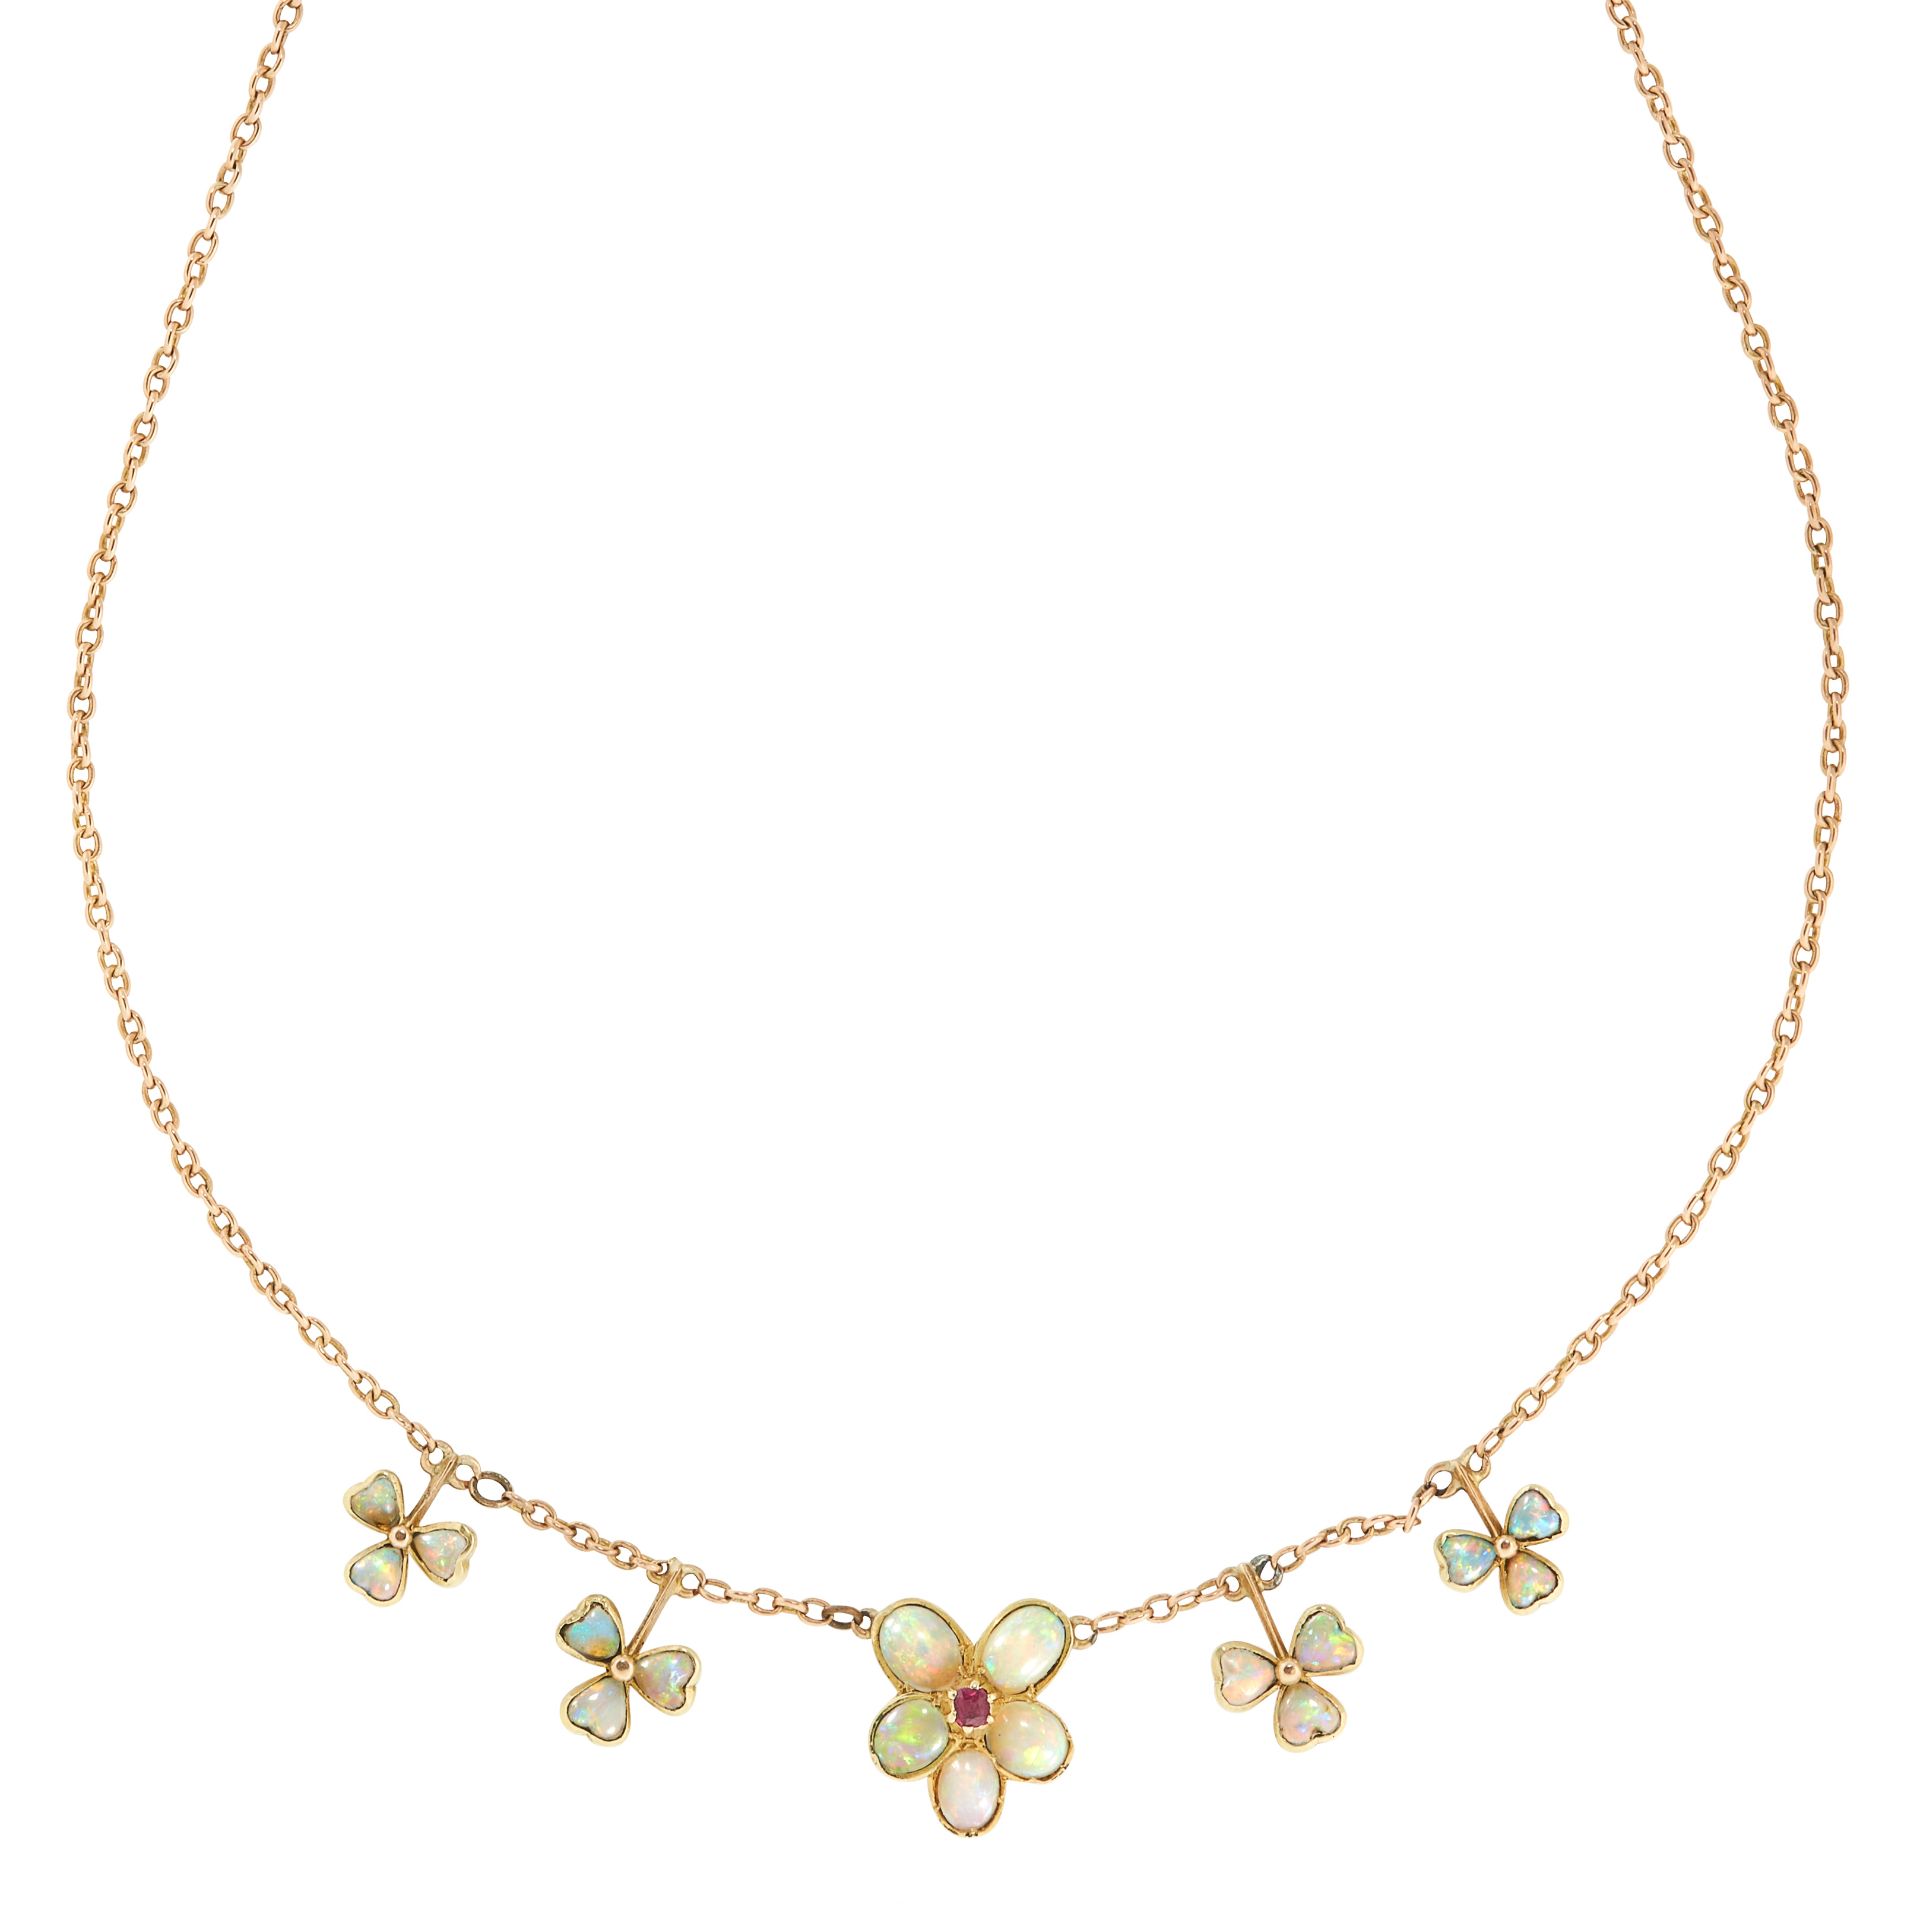 OPAL AND RUBY NECKLACE, EARLY 20TH CENTURY set with a cluster of five cabochon opals in the form